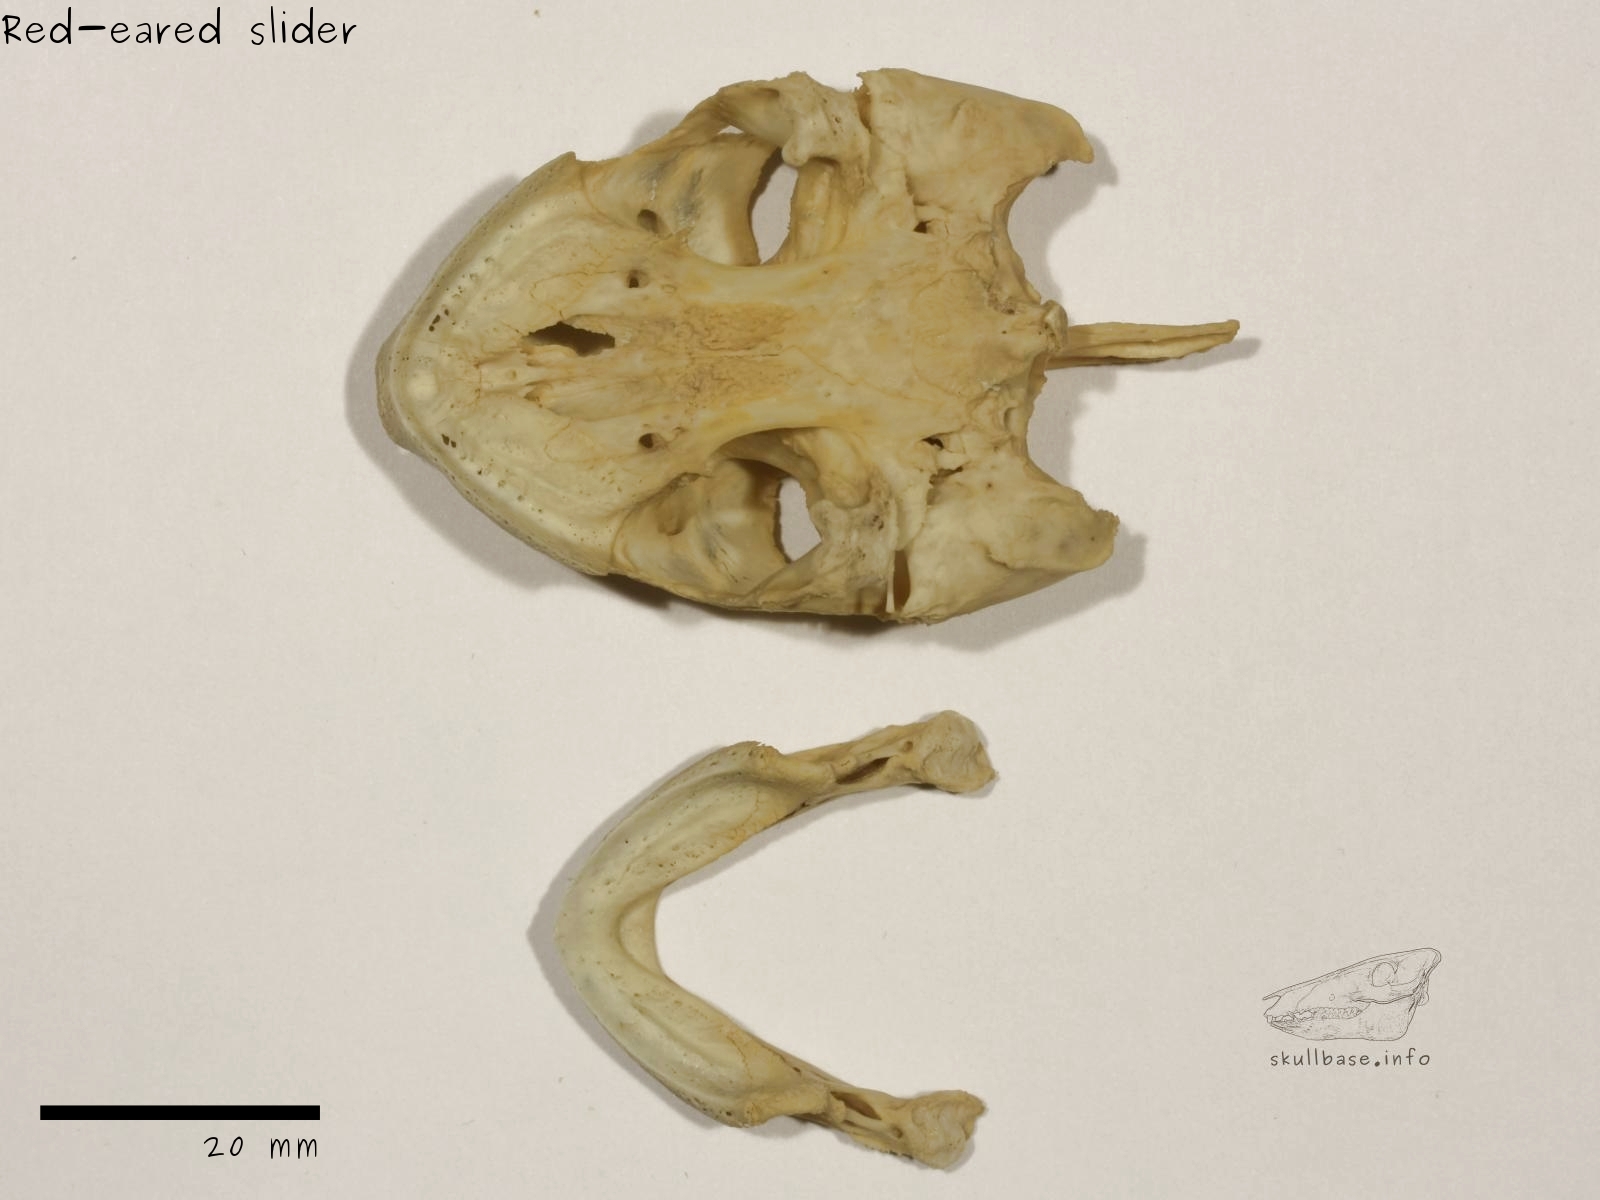 Red-eared slider (Trachemys scripta elegans) skull ventral view and jaw